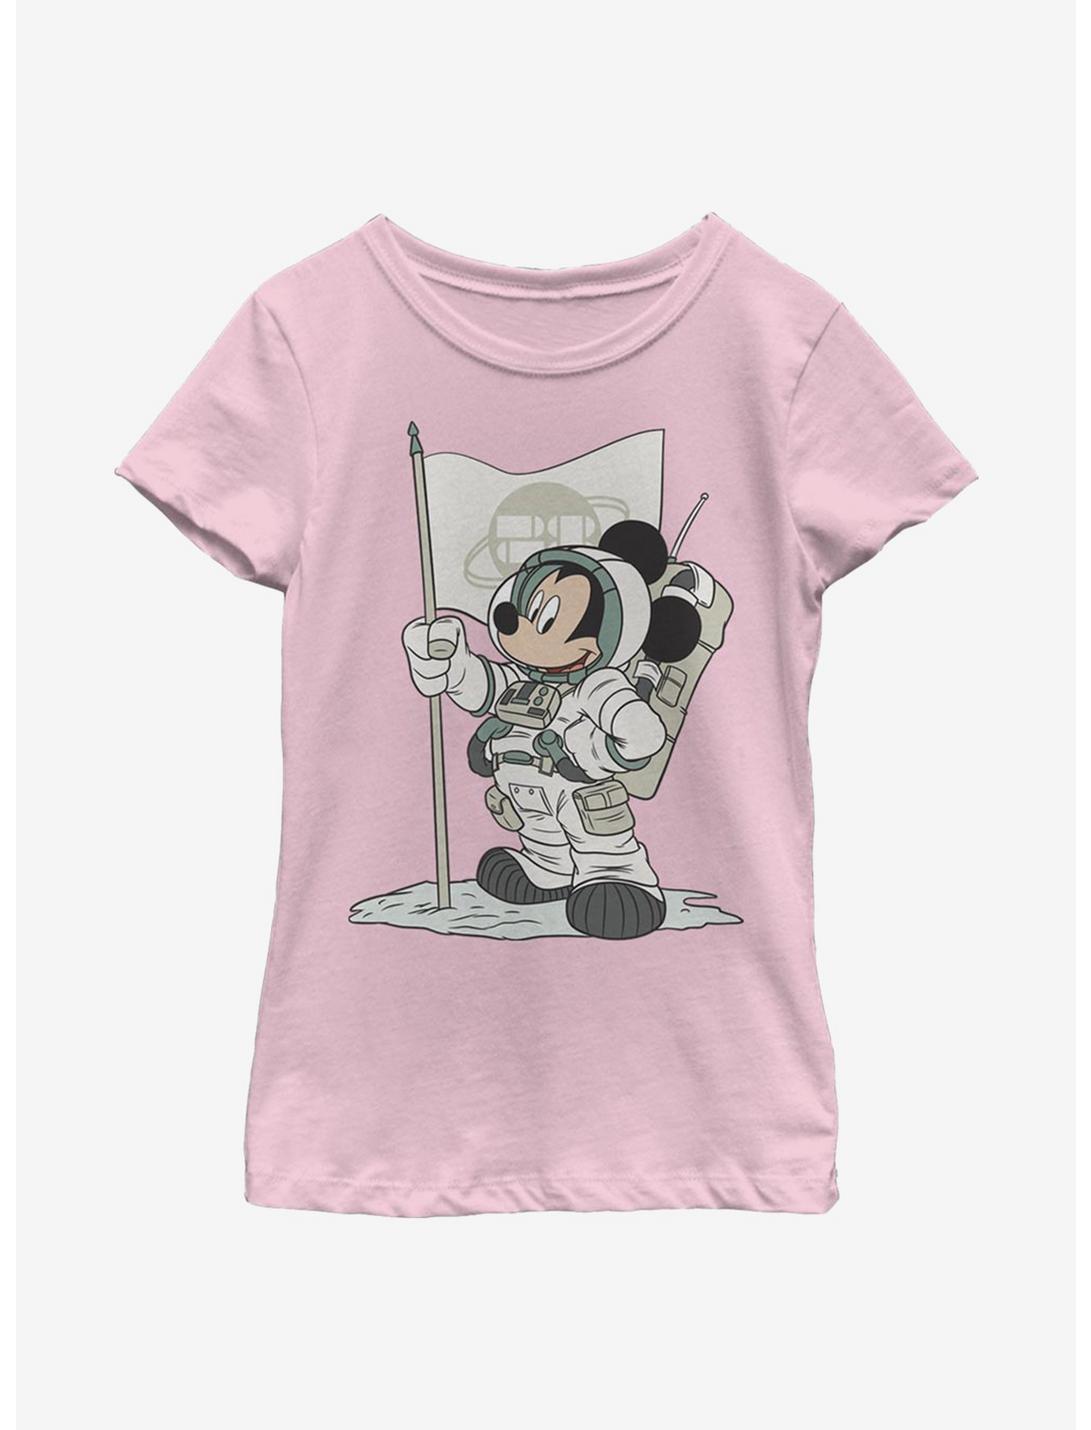 Disney Mickey Mouse Astro Mickey Youth Girls T-Shirt, PINK, hi-res